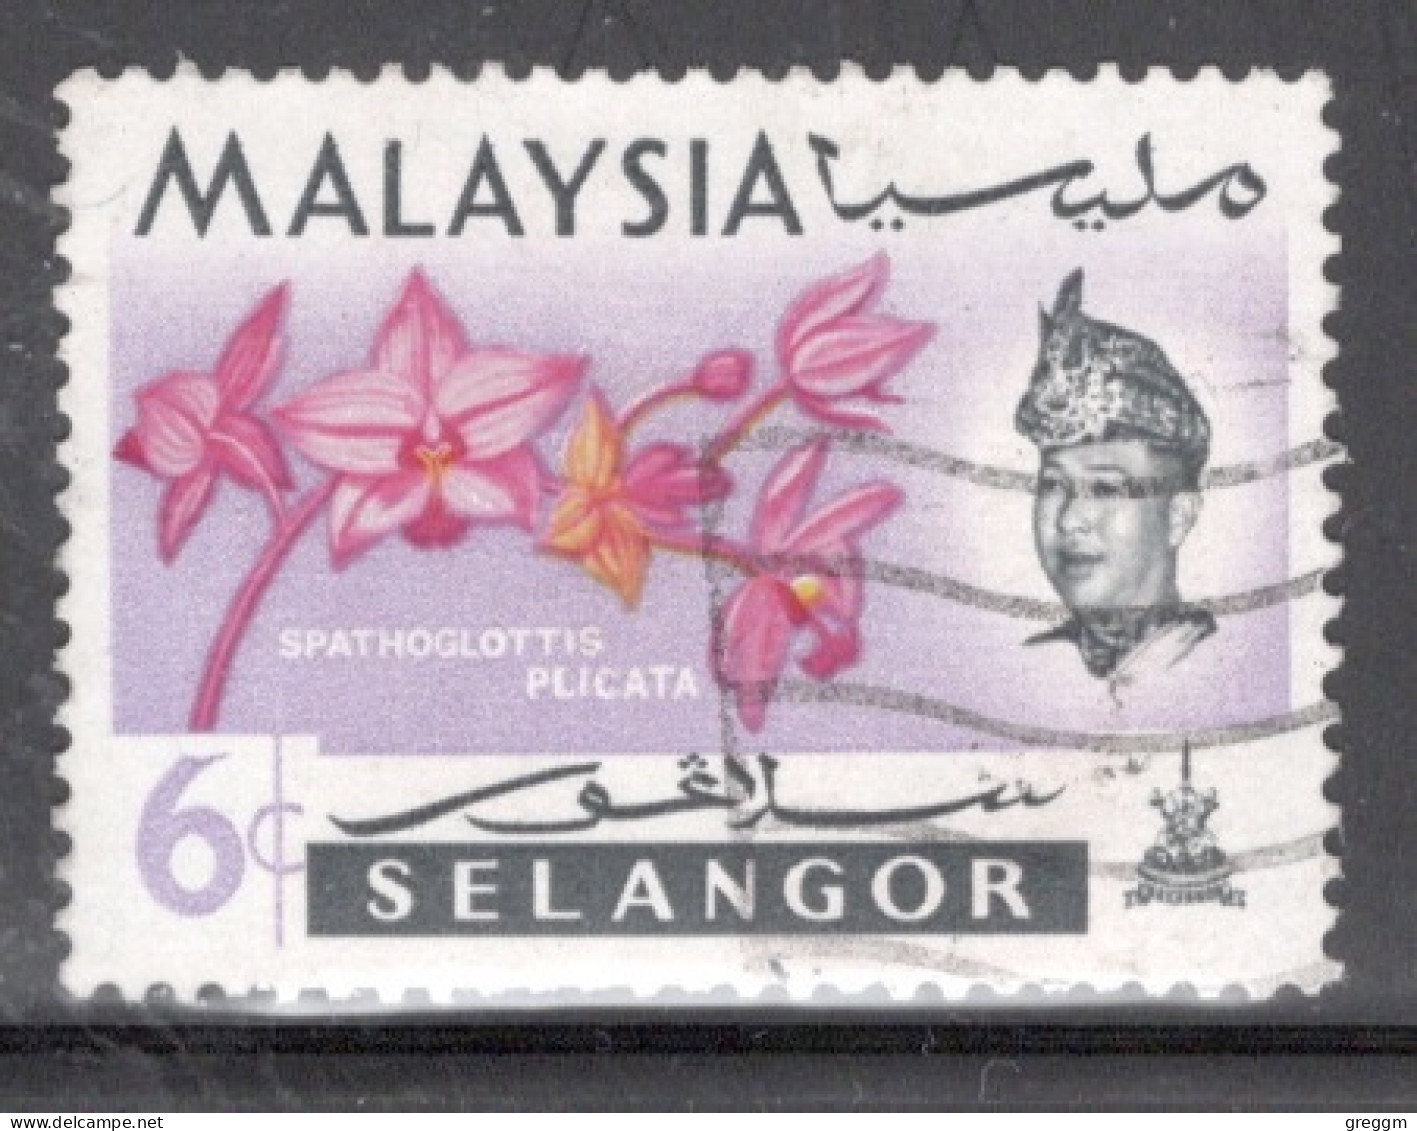 Malaya Selangor 1965 Single 6 Cent Stamp From The Flowers Set In Fine Used Condition. - Selangor